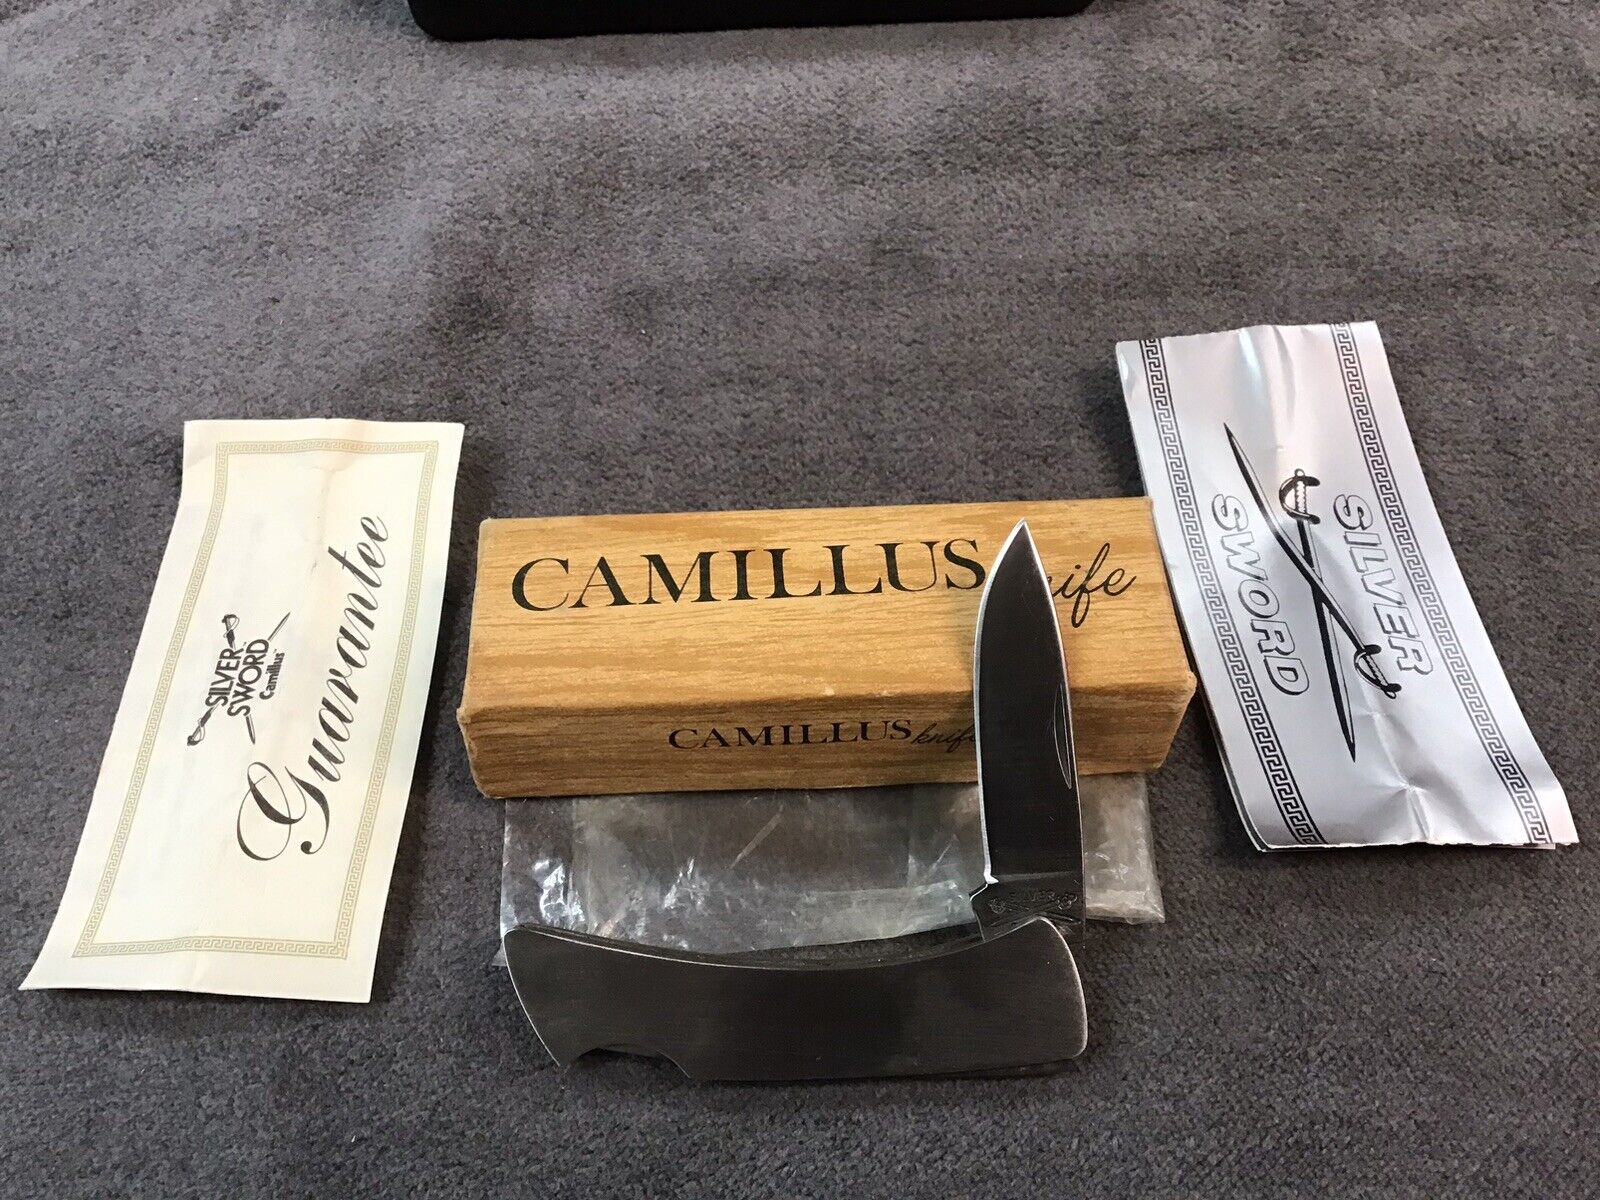 CAMILLUS New York Knife Made in USA 864 Lockback Smooth Stainless Steel Handles